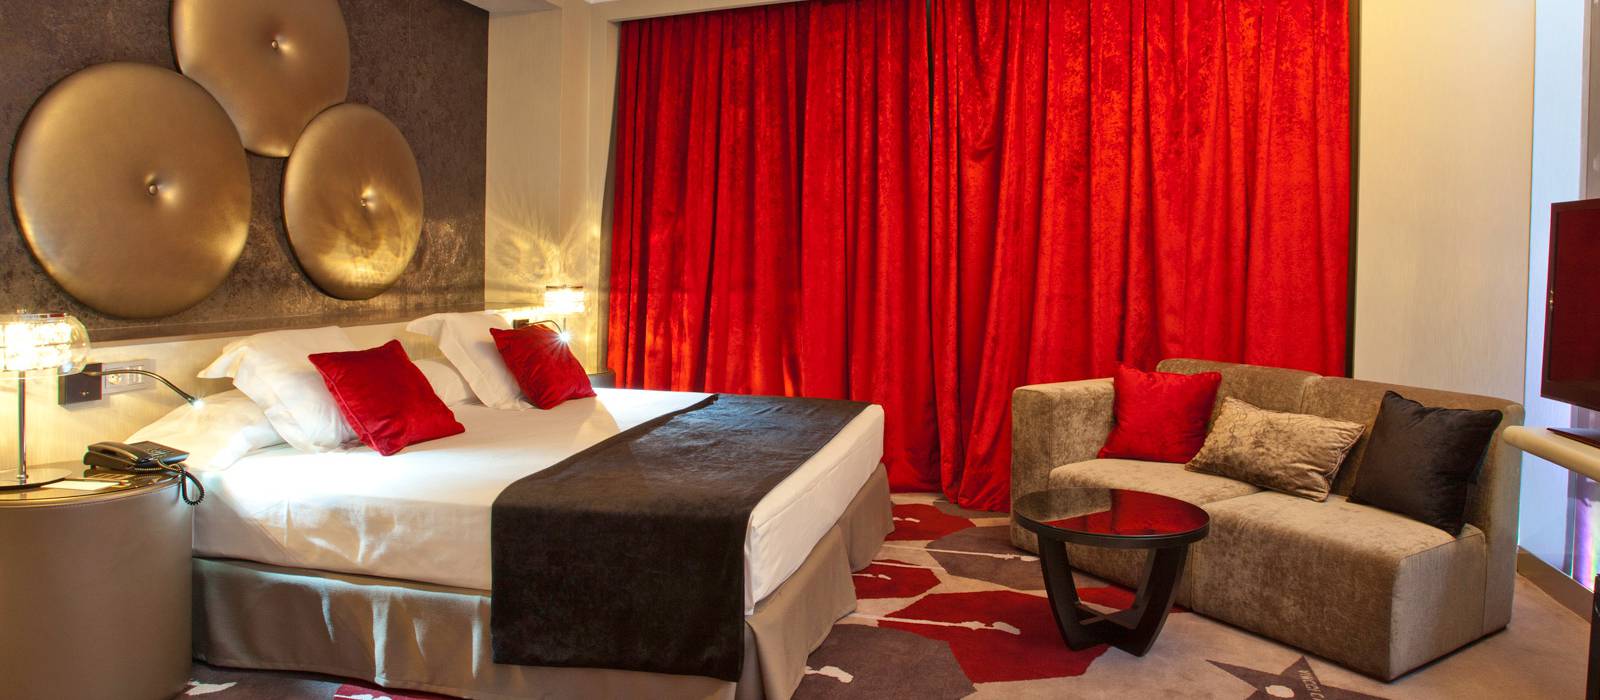  Promotions Hotel Vincci Madrid Capitol - Book now and save! -10%